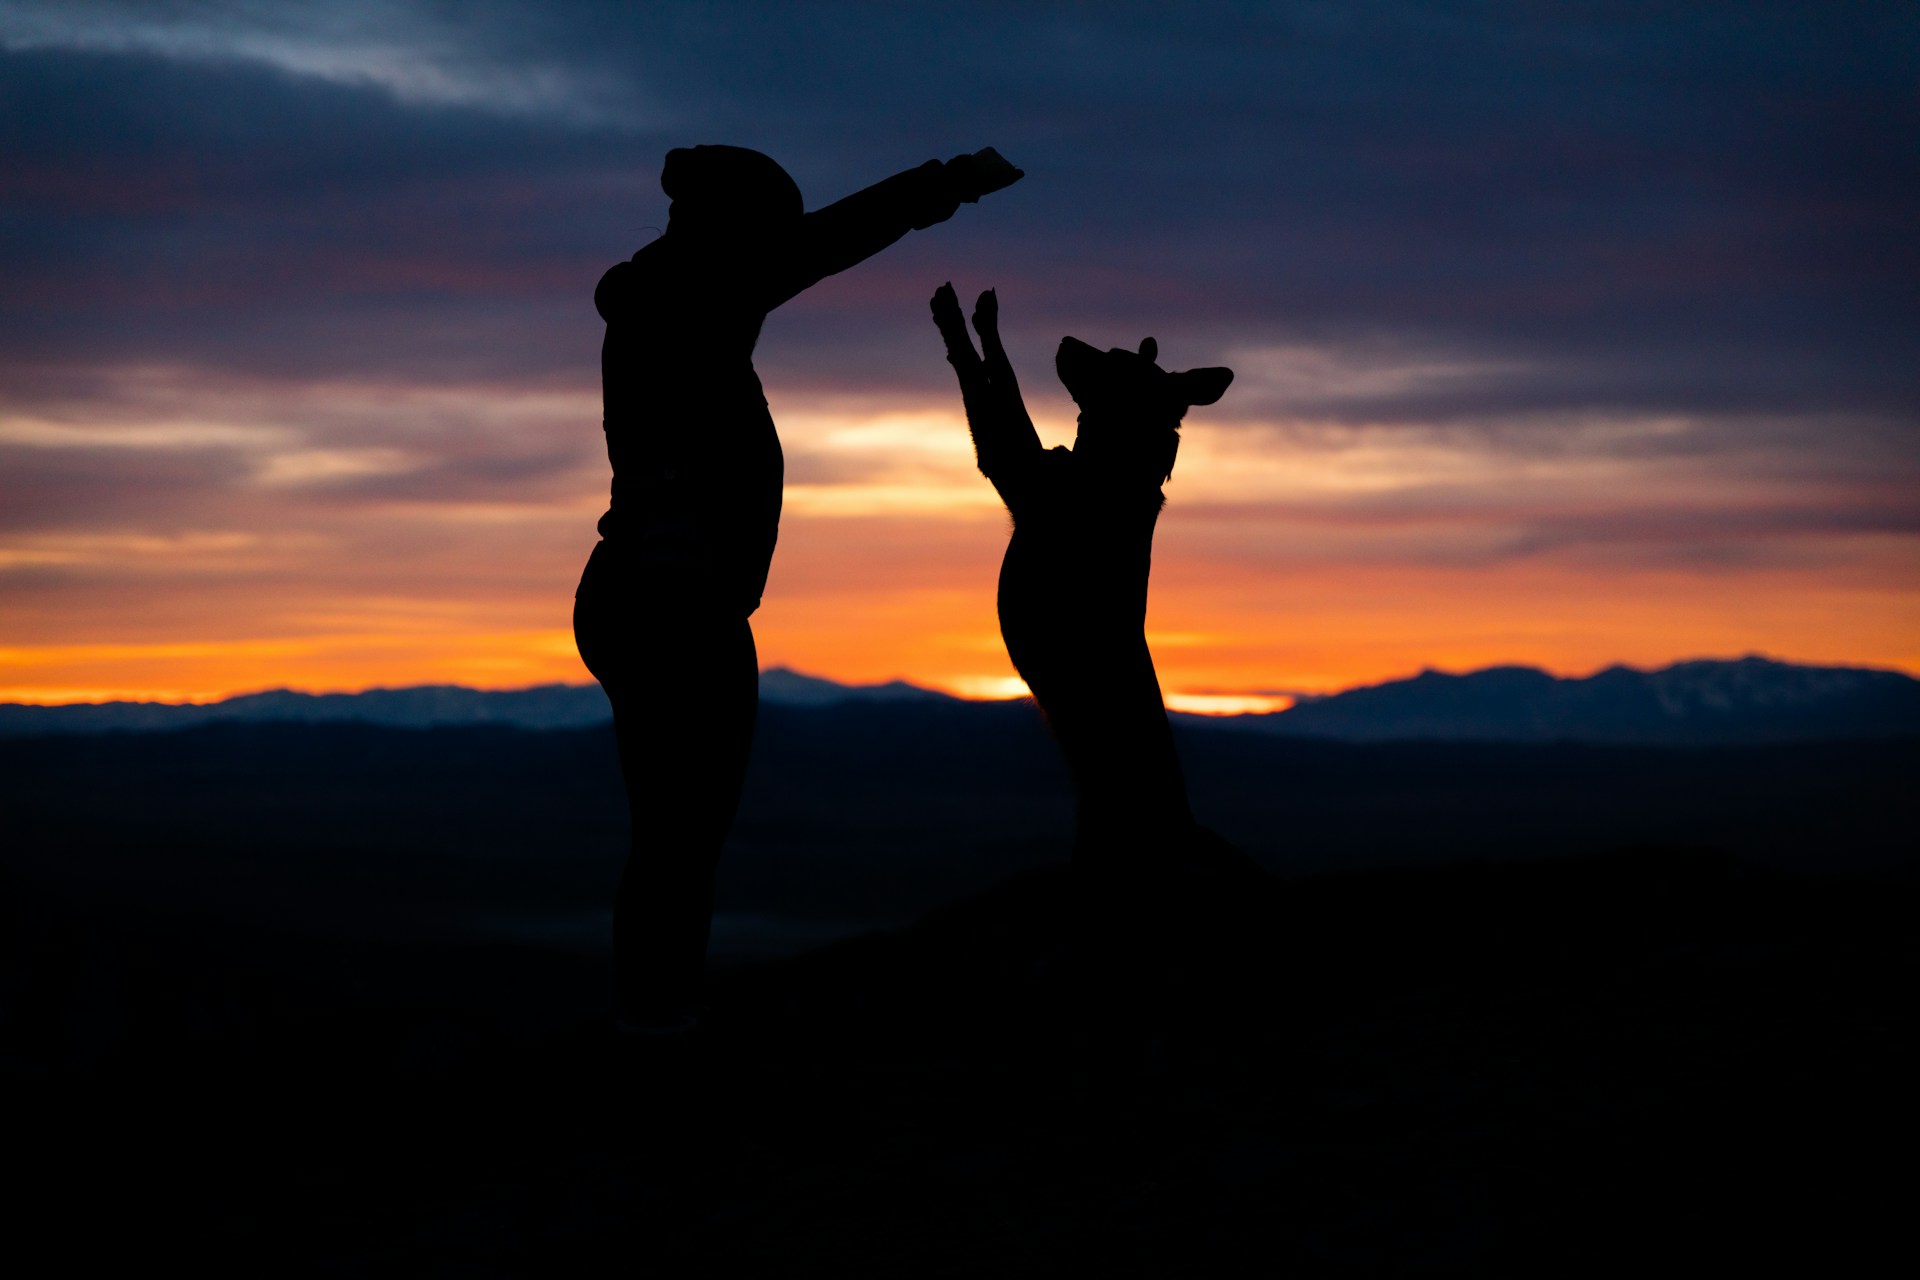 A man training his dogs against a sunset